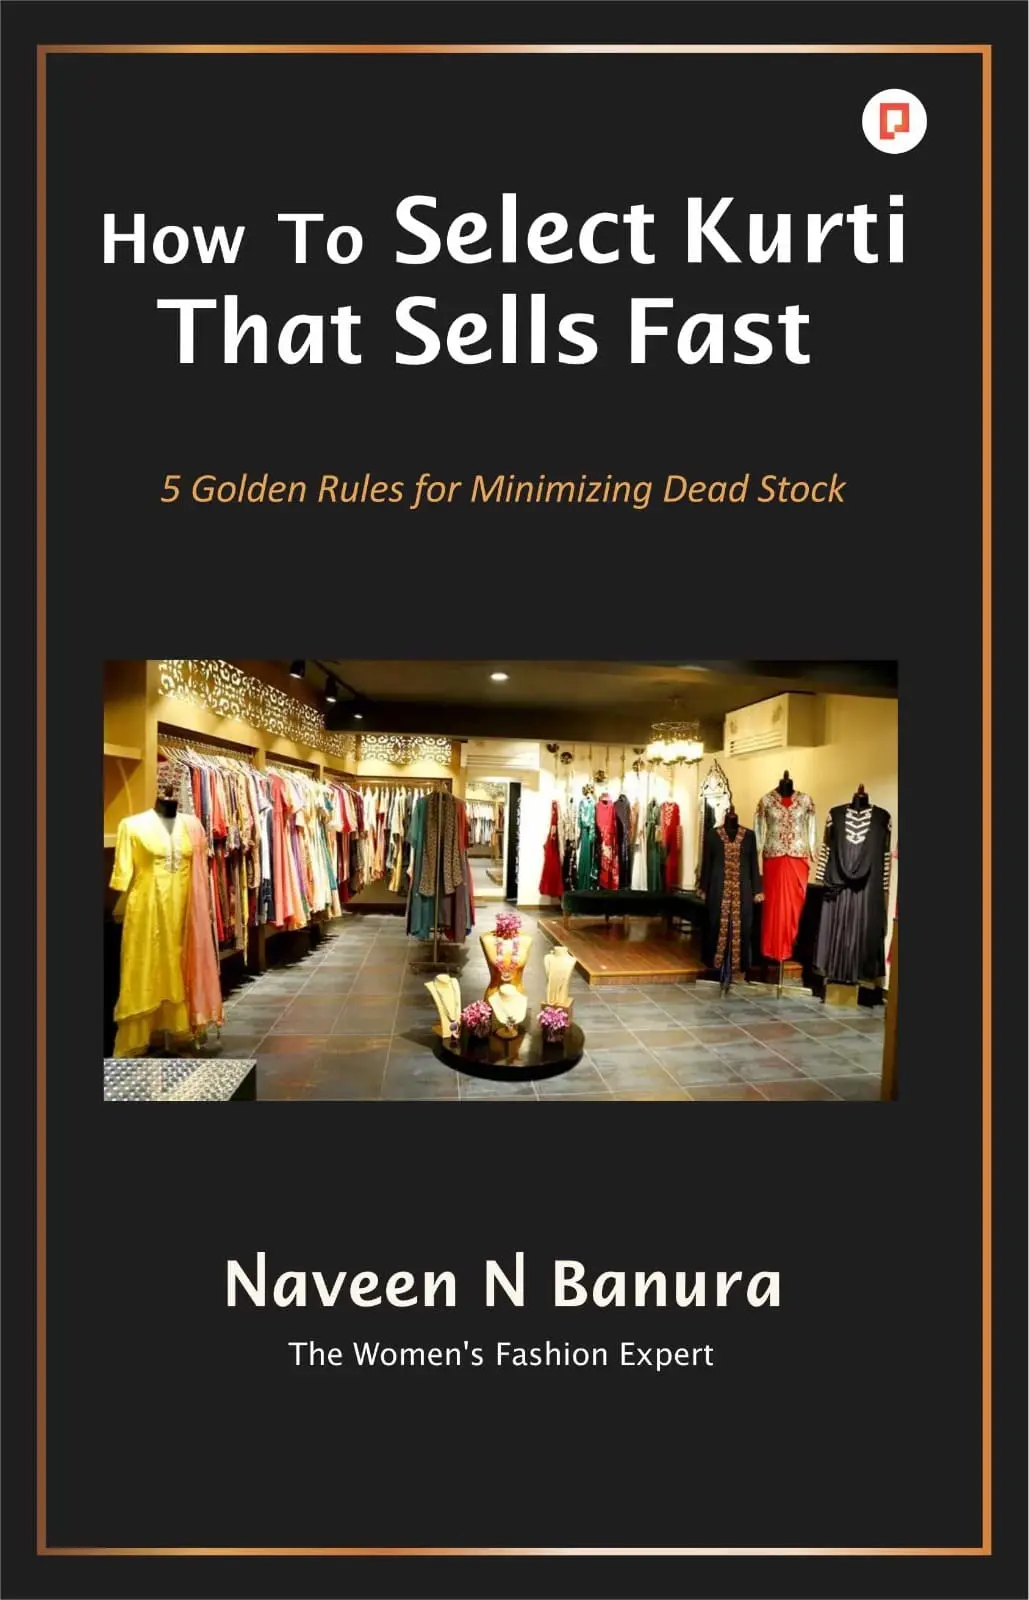 How to Select Kurti that Sells Fast, business self help book